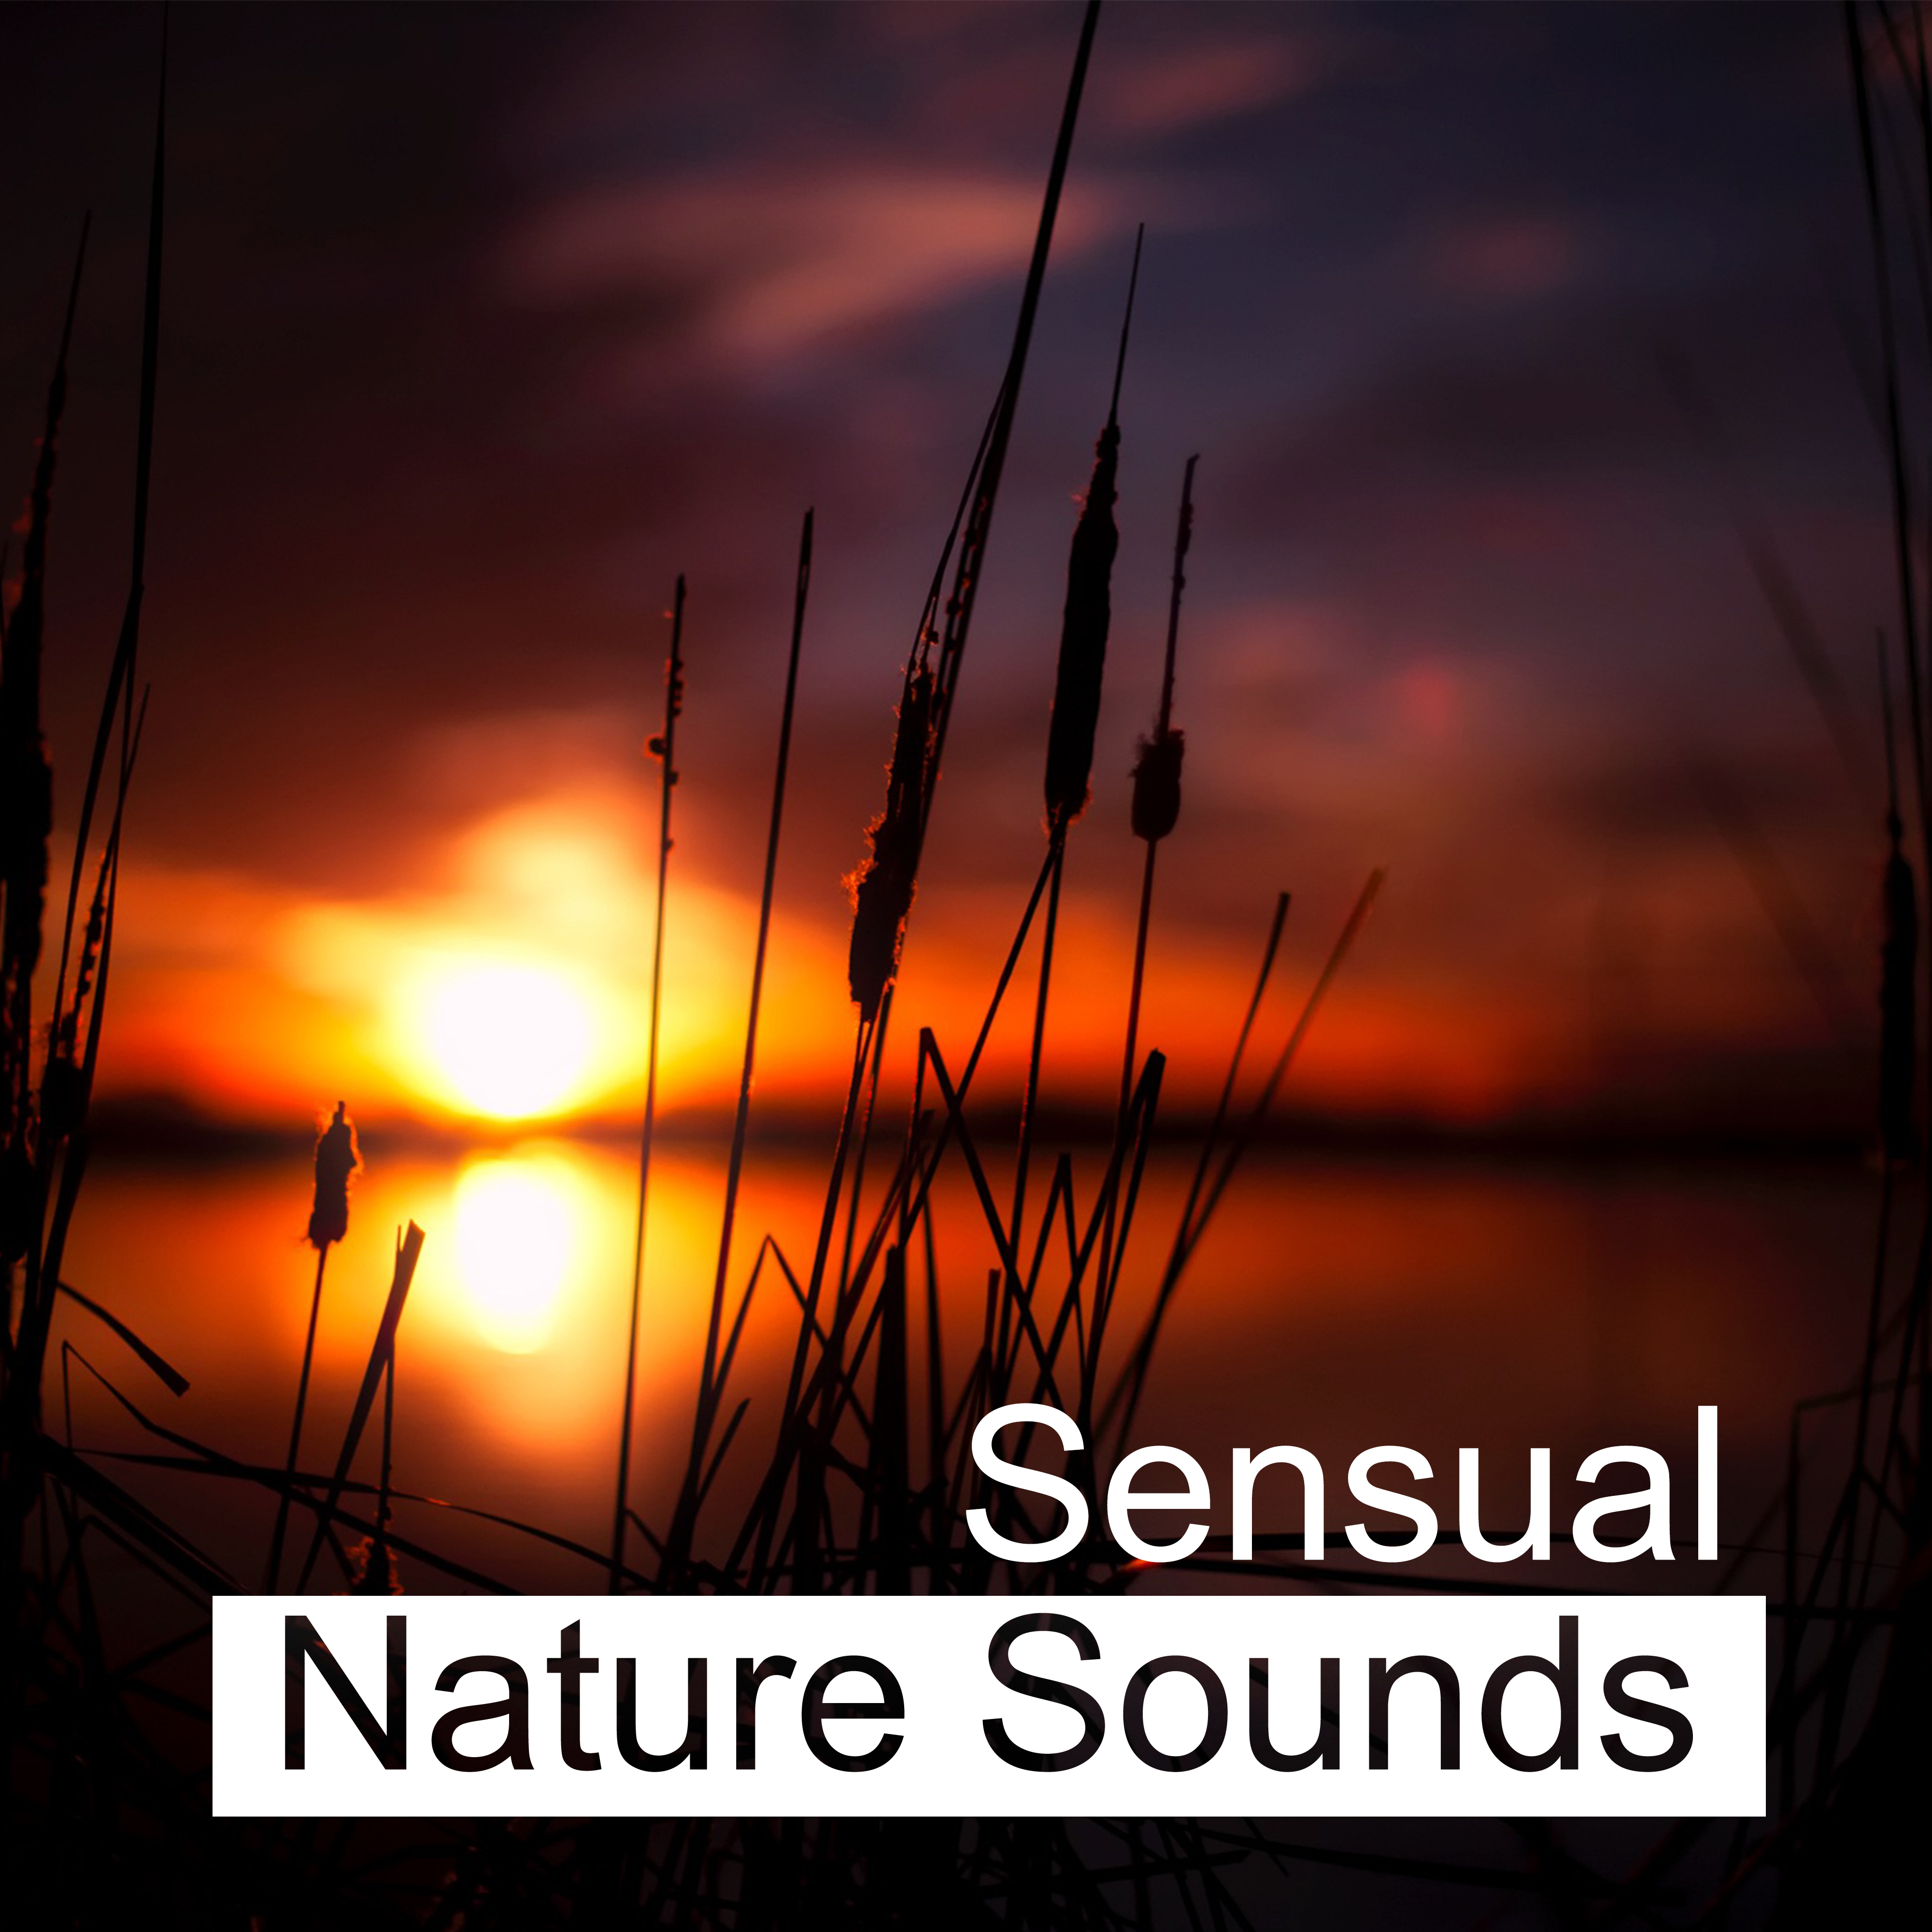 Sensual Nature Sounds – Calming Waves, Harmony Soul, Inner Silence, Peaceful Sounds to Rest, New Age Music